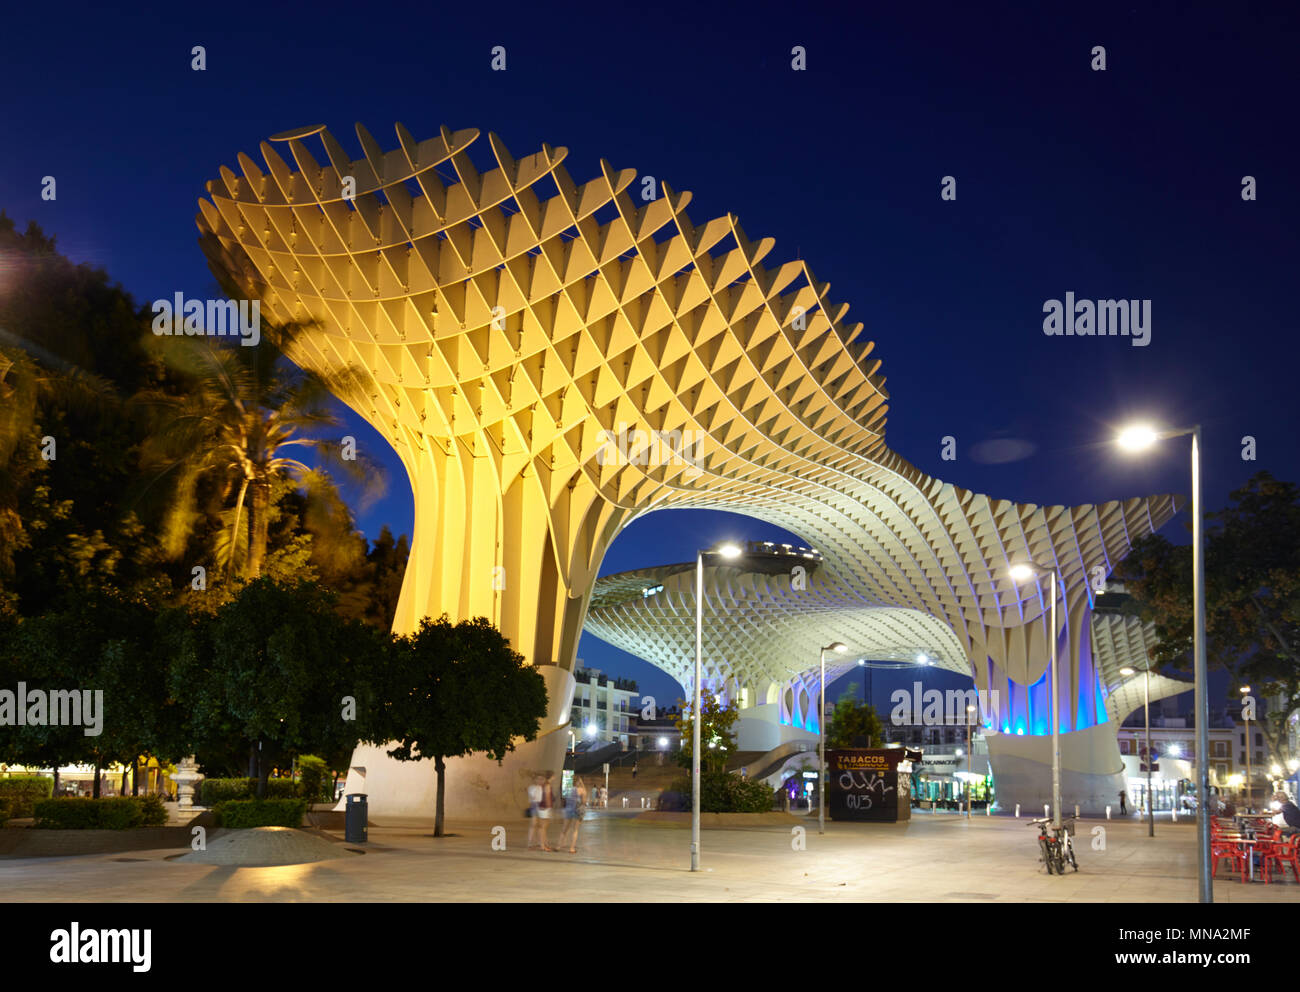 The wooden structure of the Metropol Parasol in Seville, Spain Stock Photo